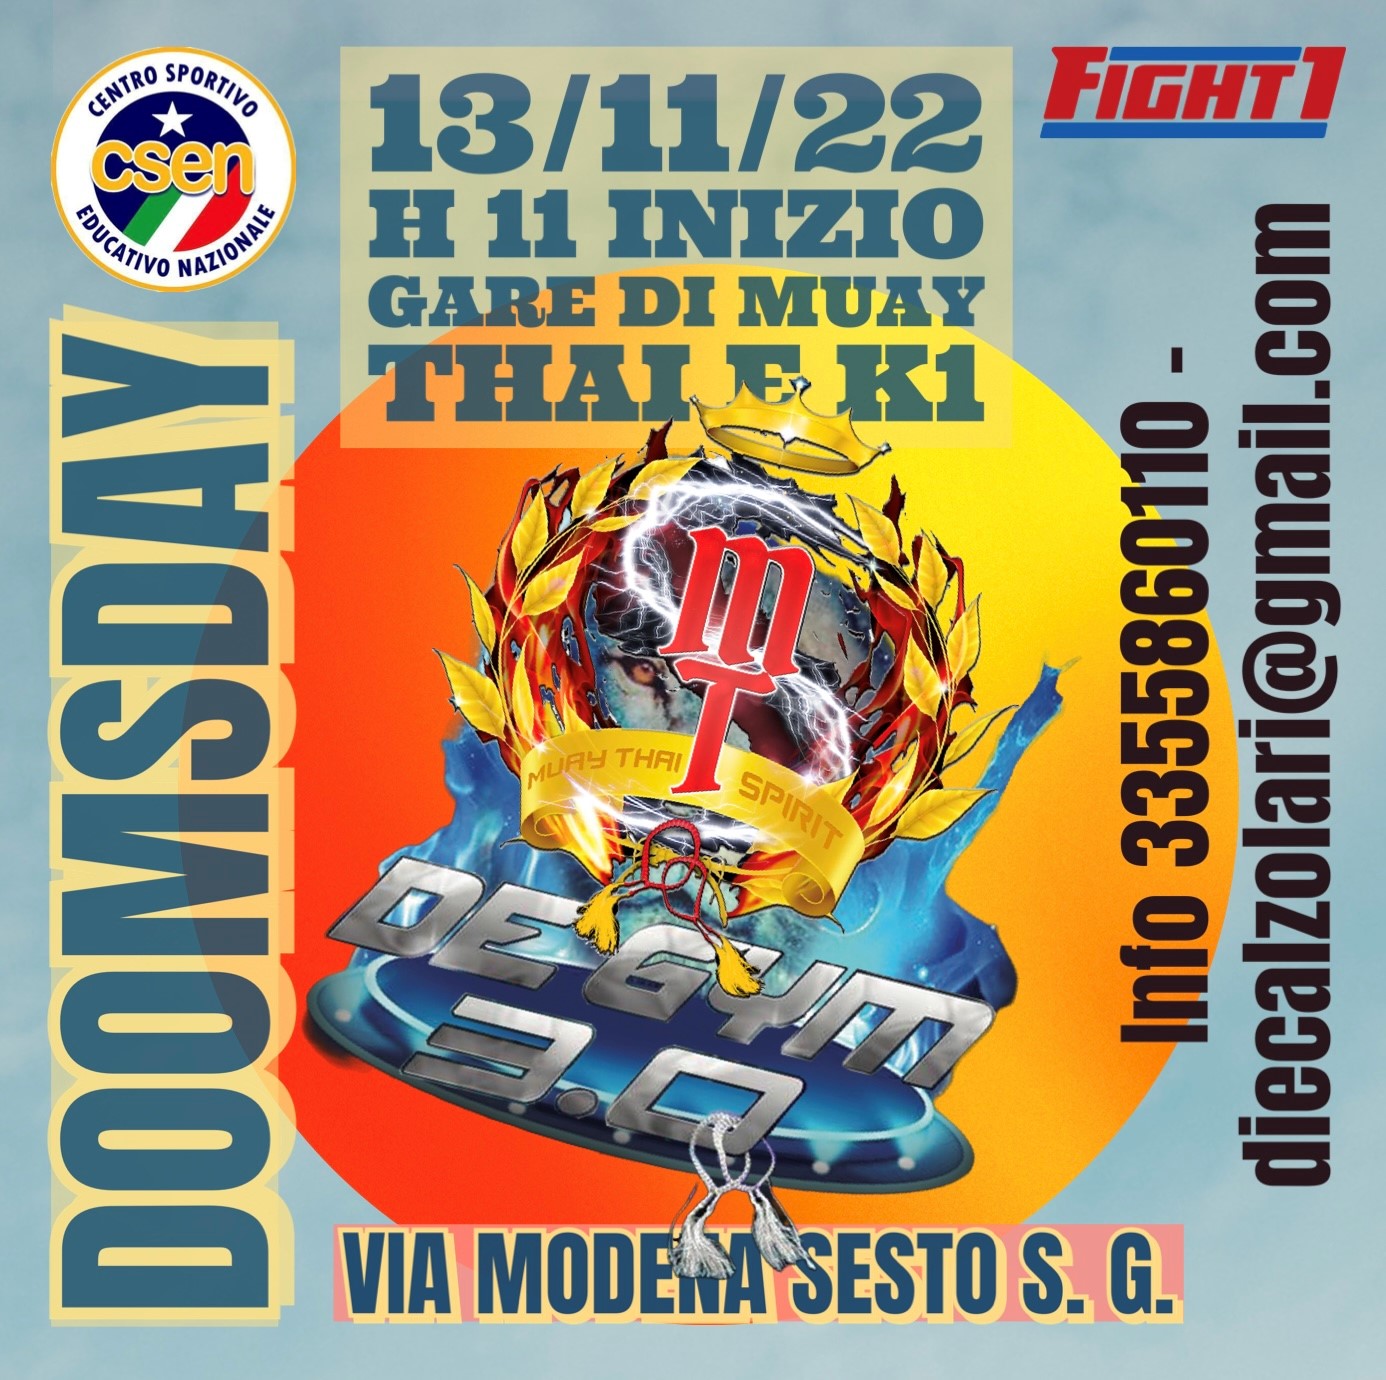 STAGE ED EVENTI NEL WEEKEND FIGHT1